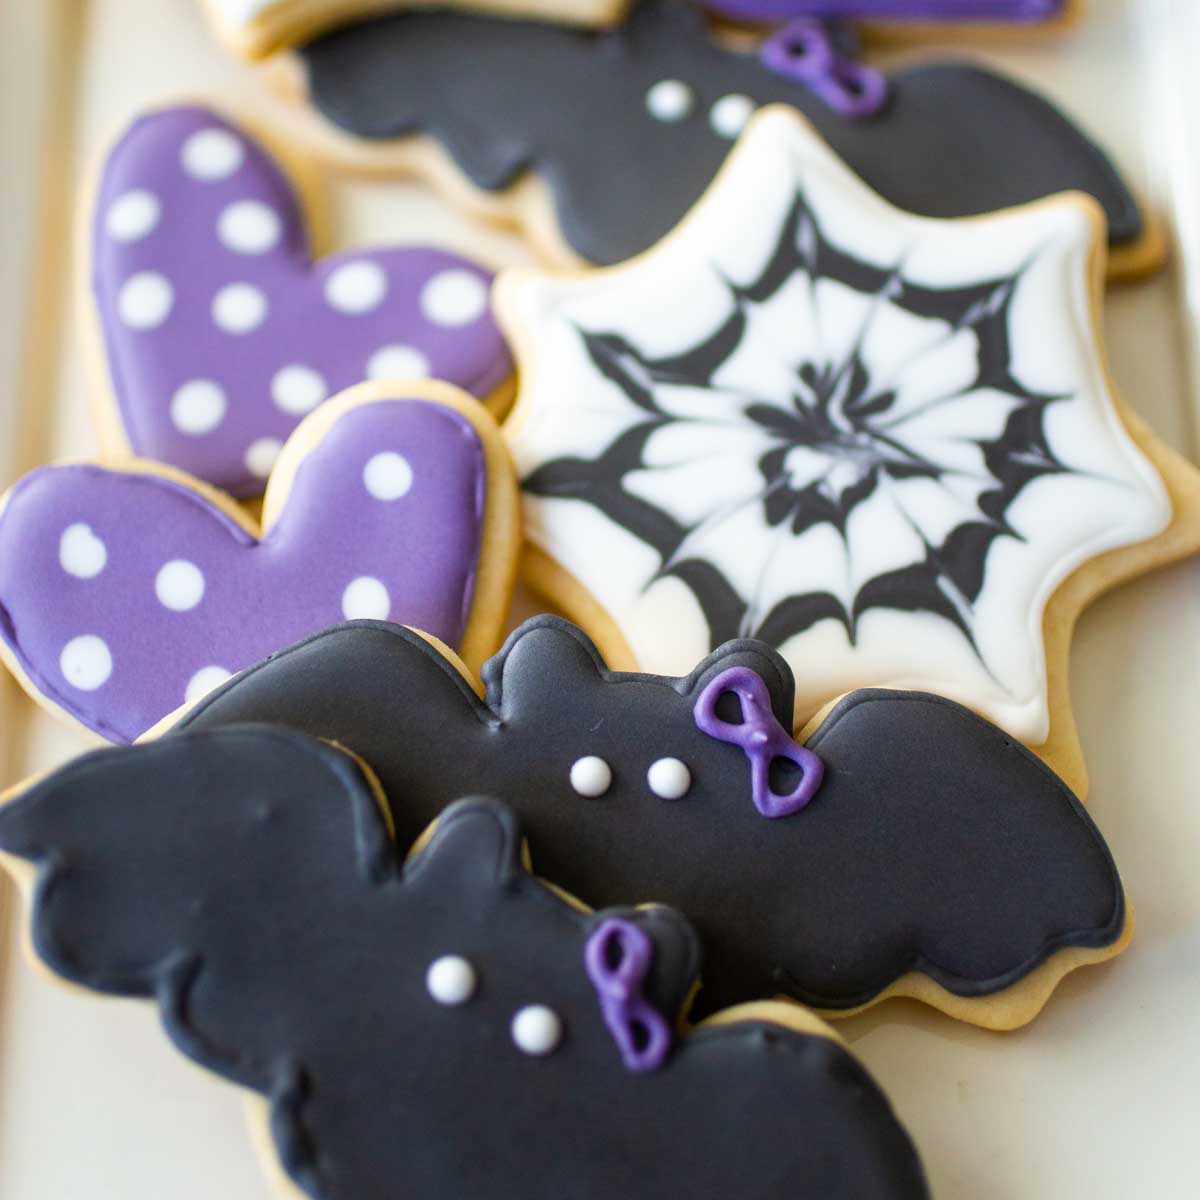 Sugar cookie platter with black bat sugar cookies with purple polka dot hearts and spider web shapes.